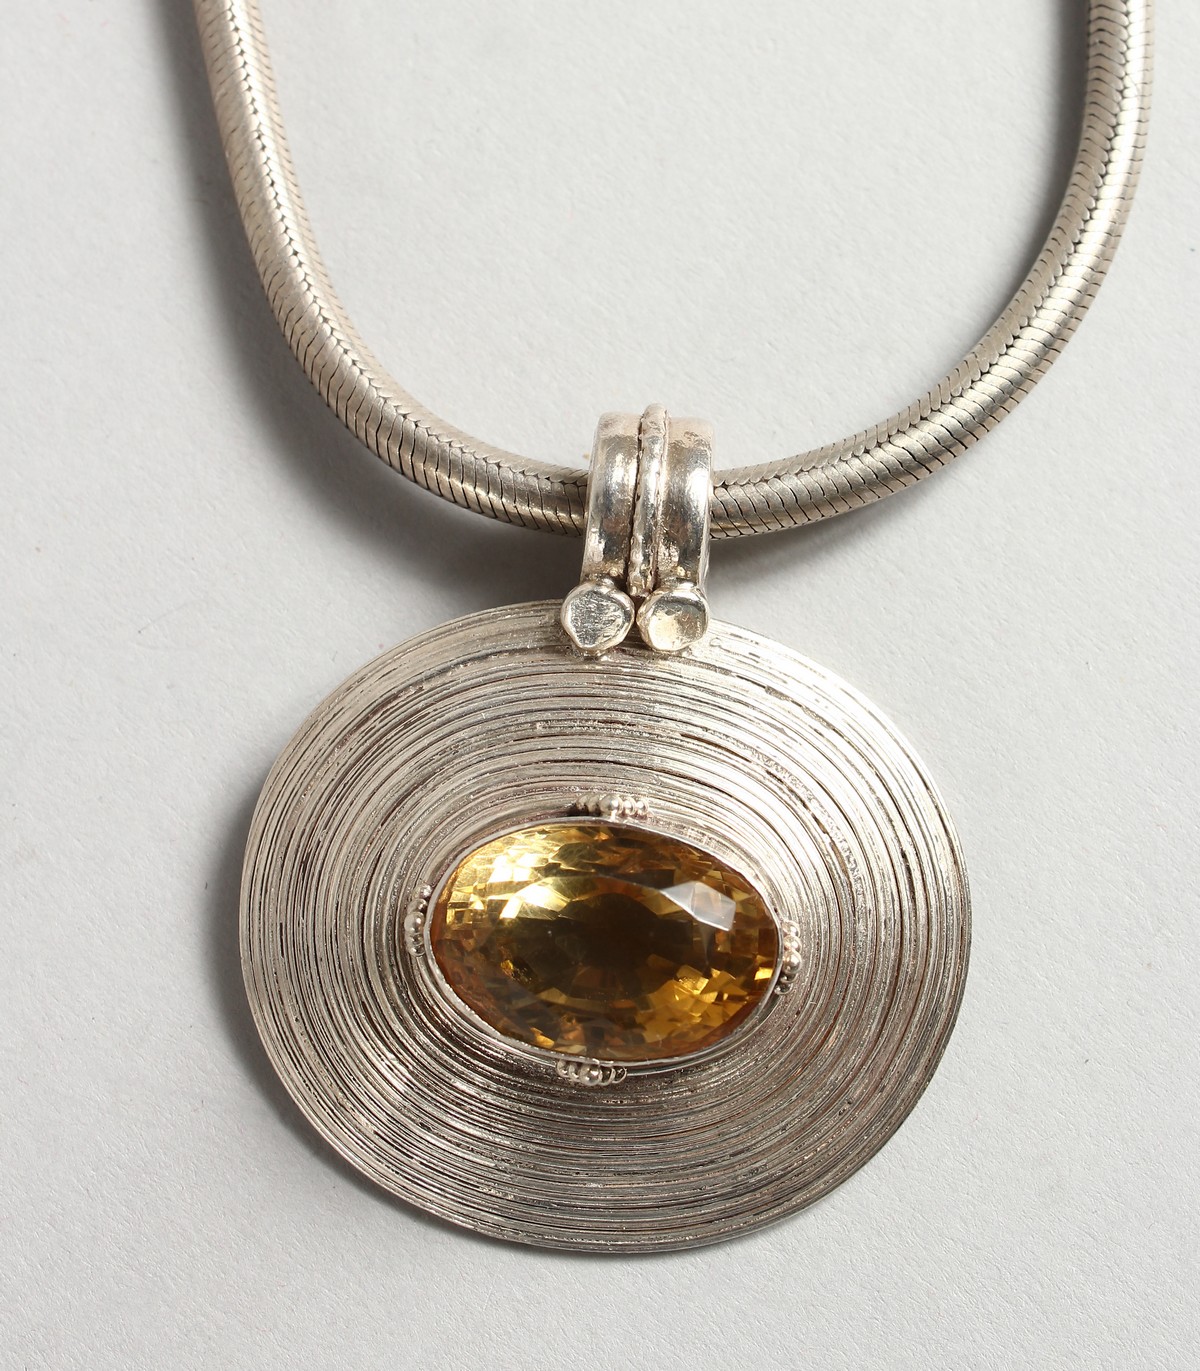 A GOOD SILVER NECK CHAIN with CITRINE.